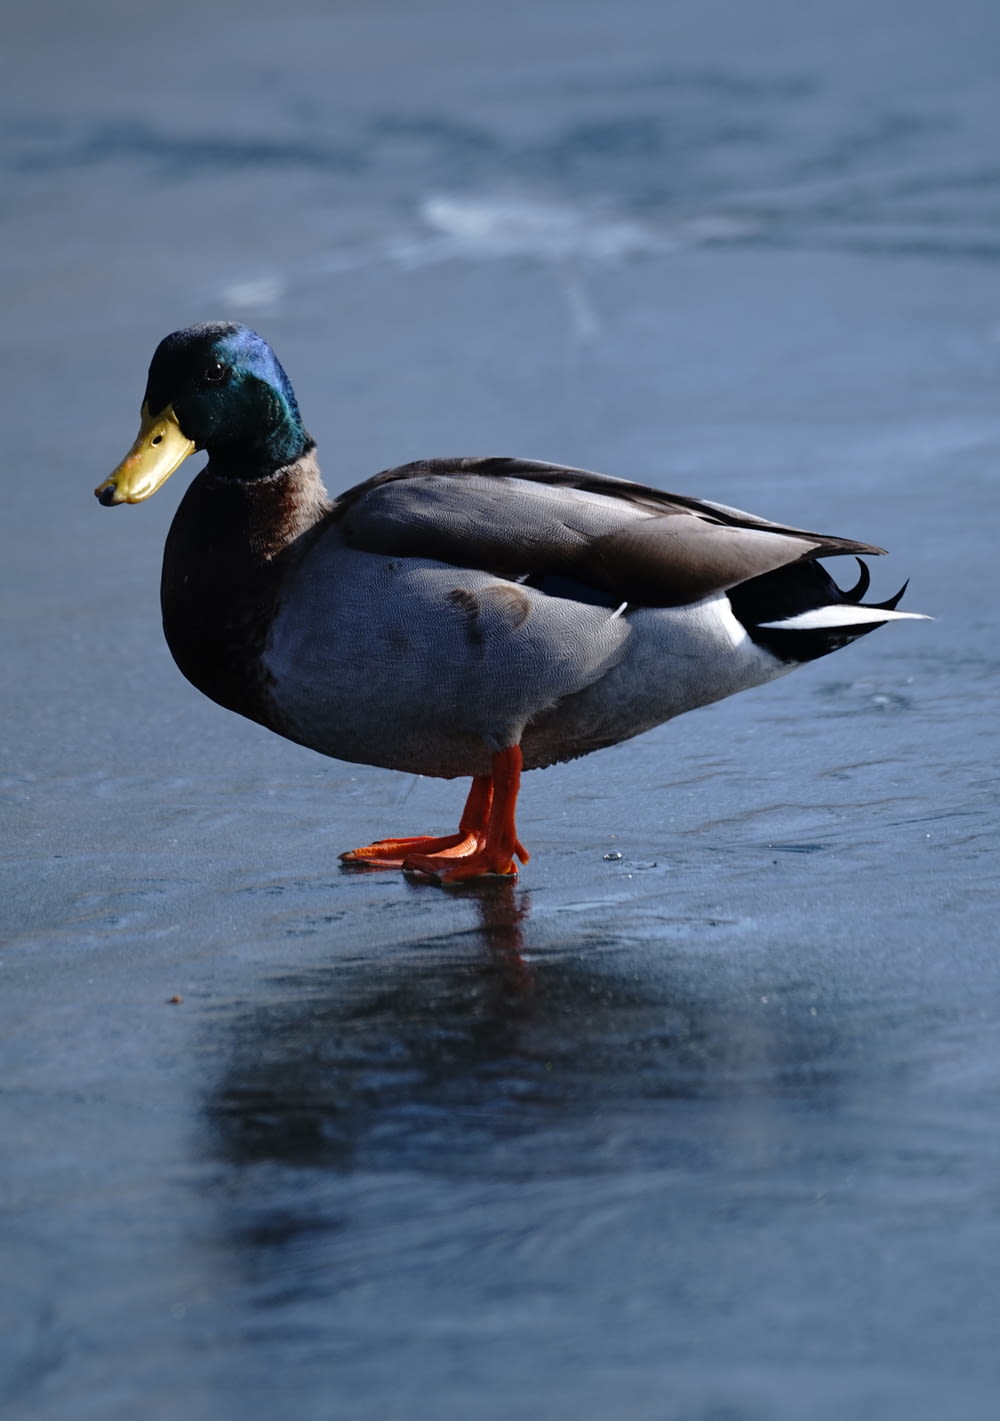 a duck is standing on the ice in the water